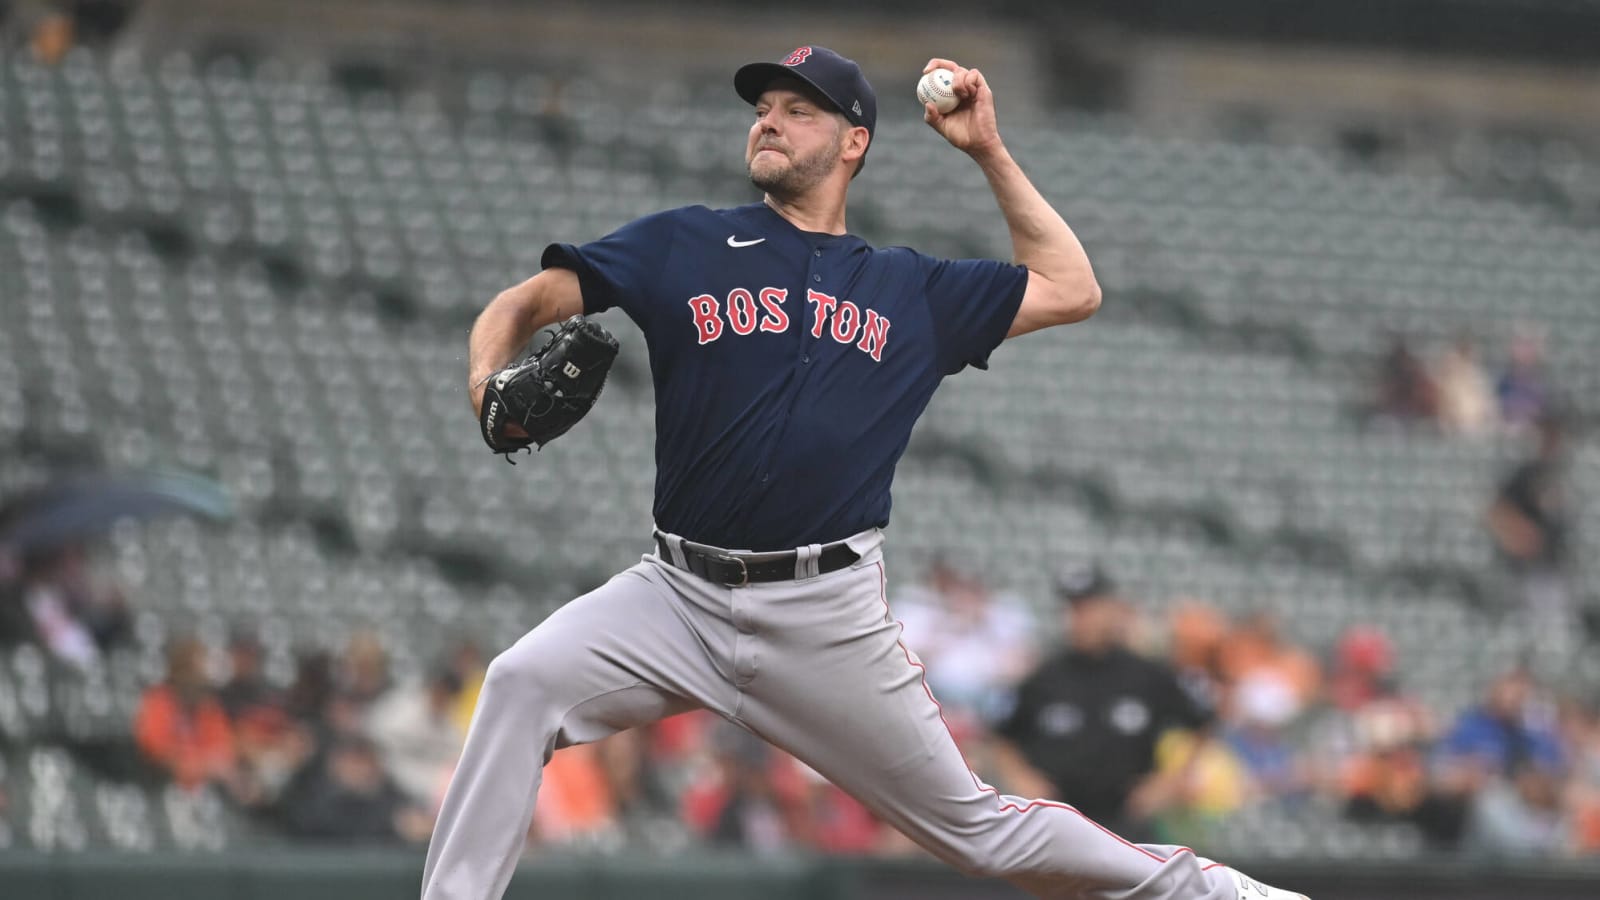 Rich Hill, 42, plans to pitch in 2023